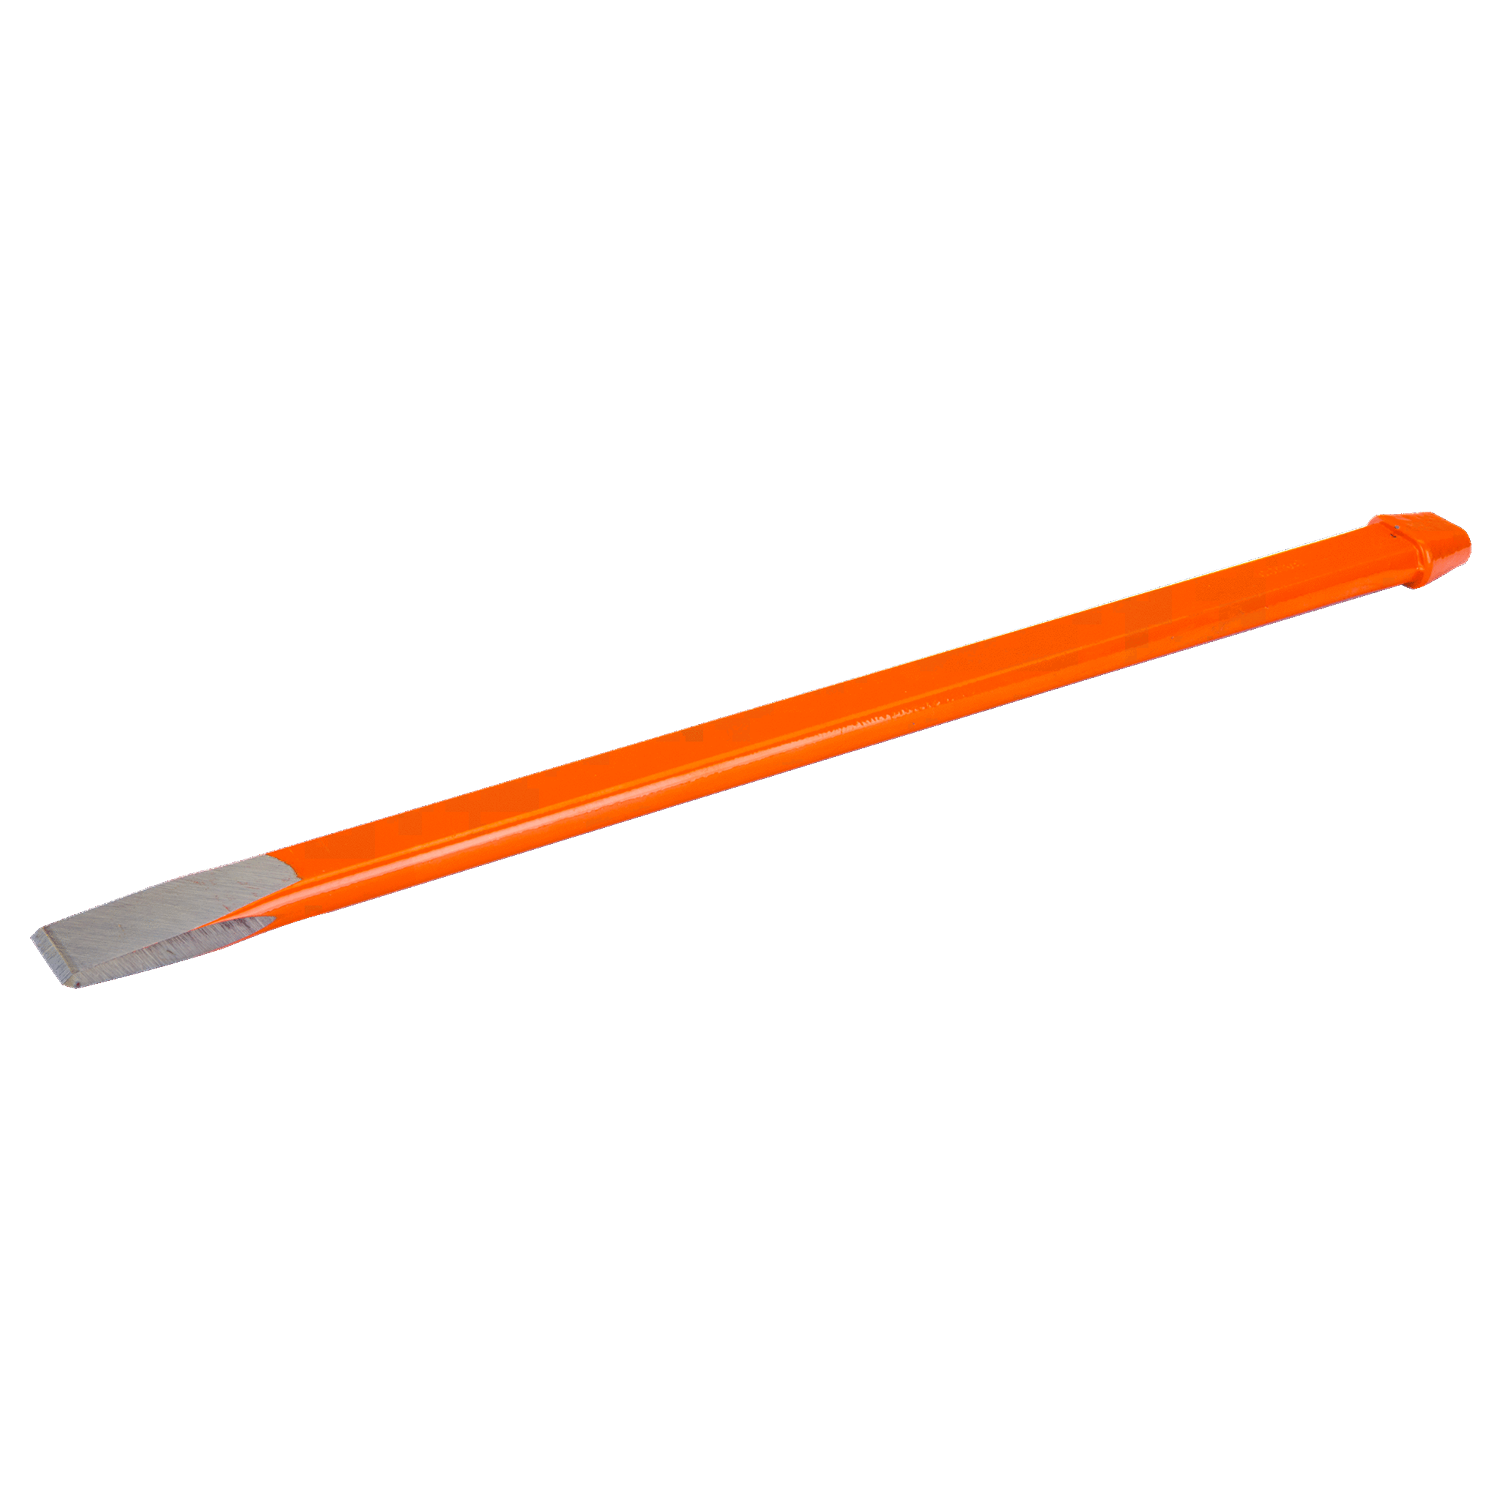 BAHCO 8740 Mason Chisel with Long Flat Shank (BAHCO Tools) - Premium Mason Chisel from BAHCO - Shop now at Yew Aik.